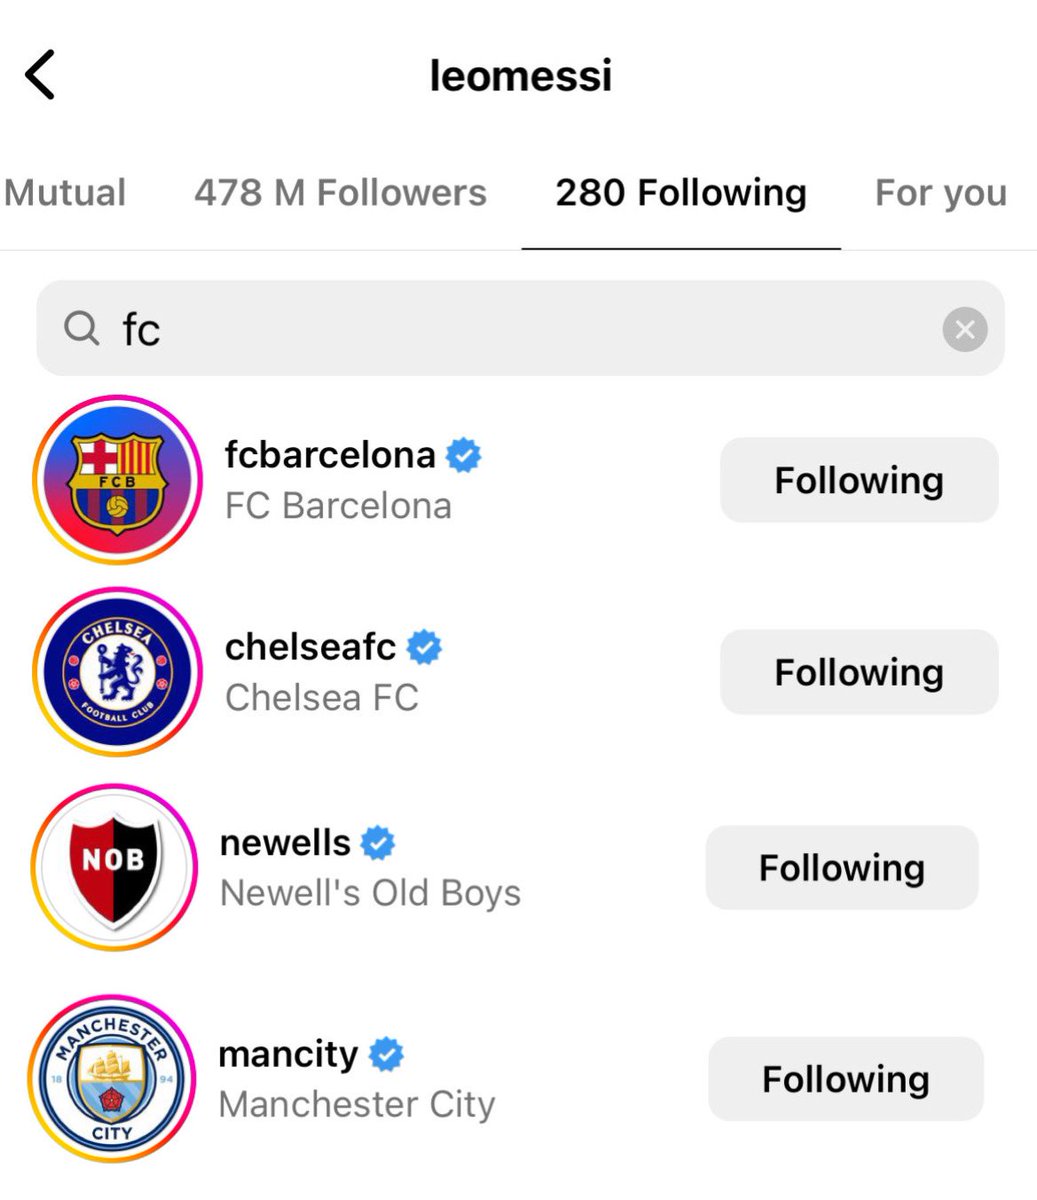 RT @StokeyyG2: Messi has now unfollowed PSG and now only follows 4 football clubs being… https://t.co/ogbpxwJhiK